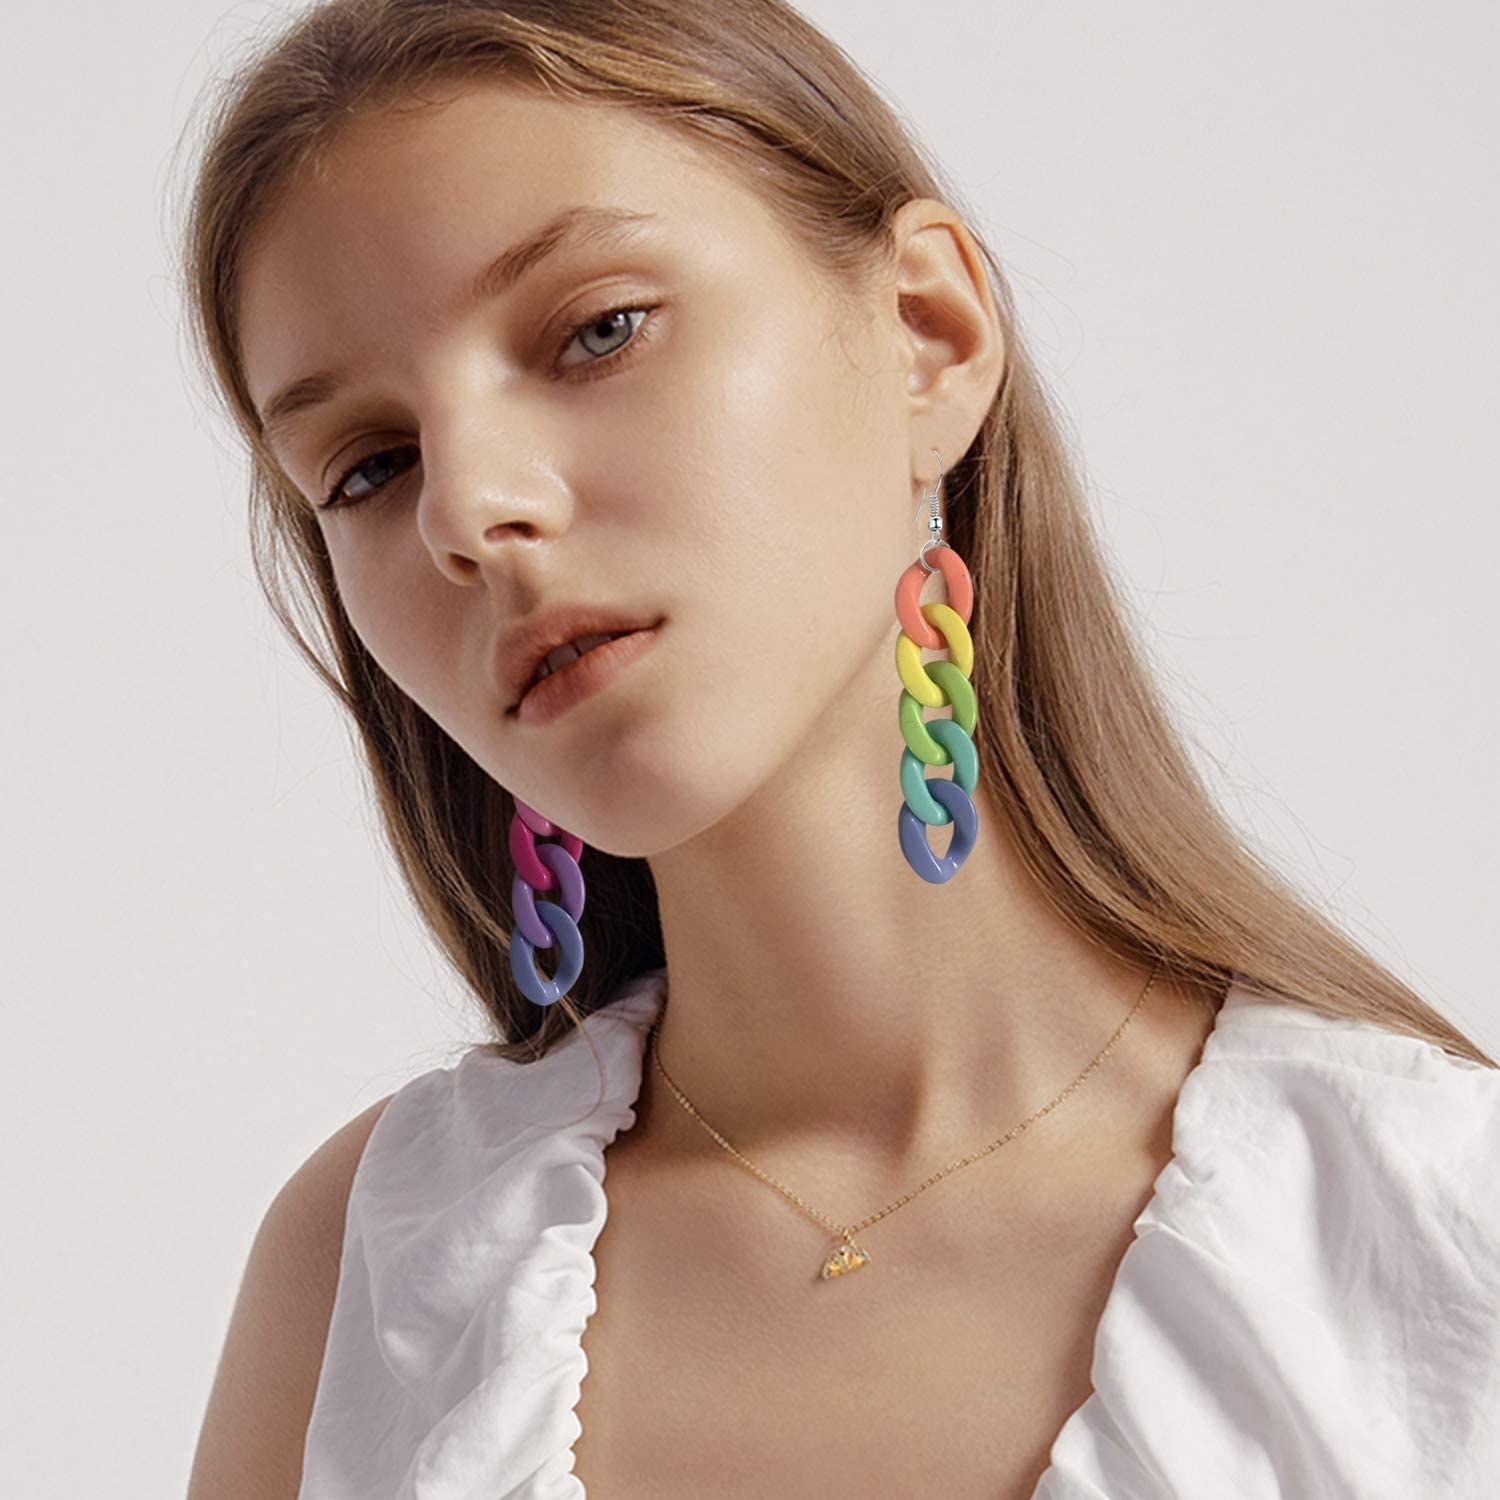 a model wearing the rainbow-colored pendant earrings